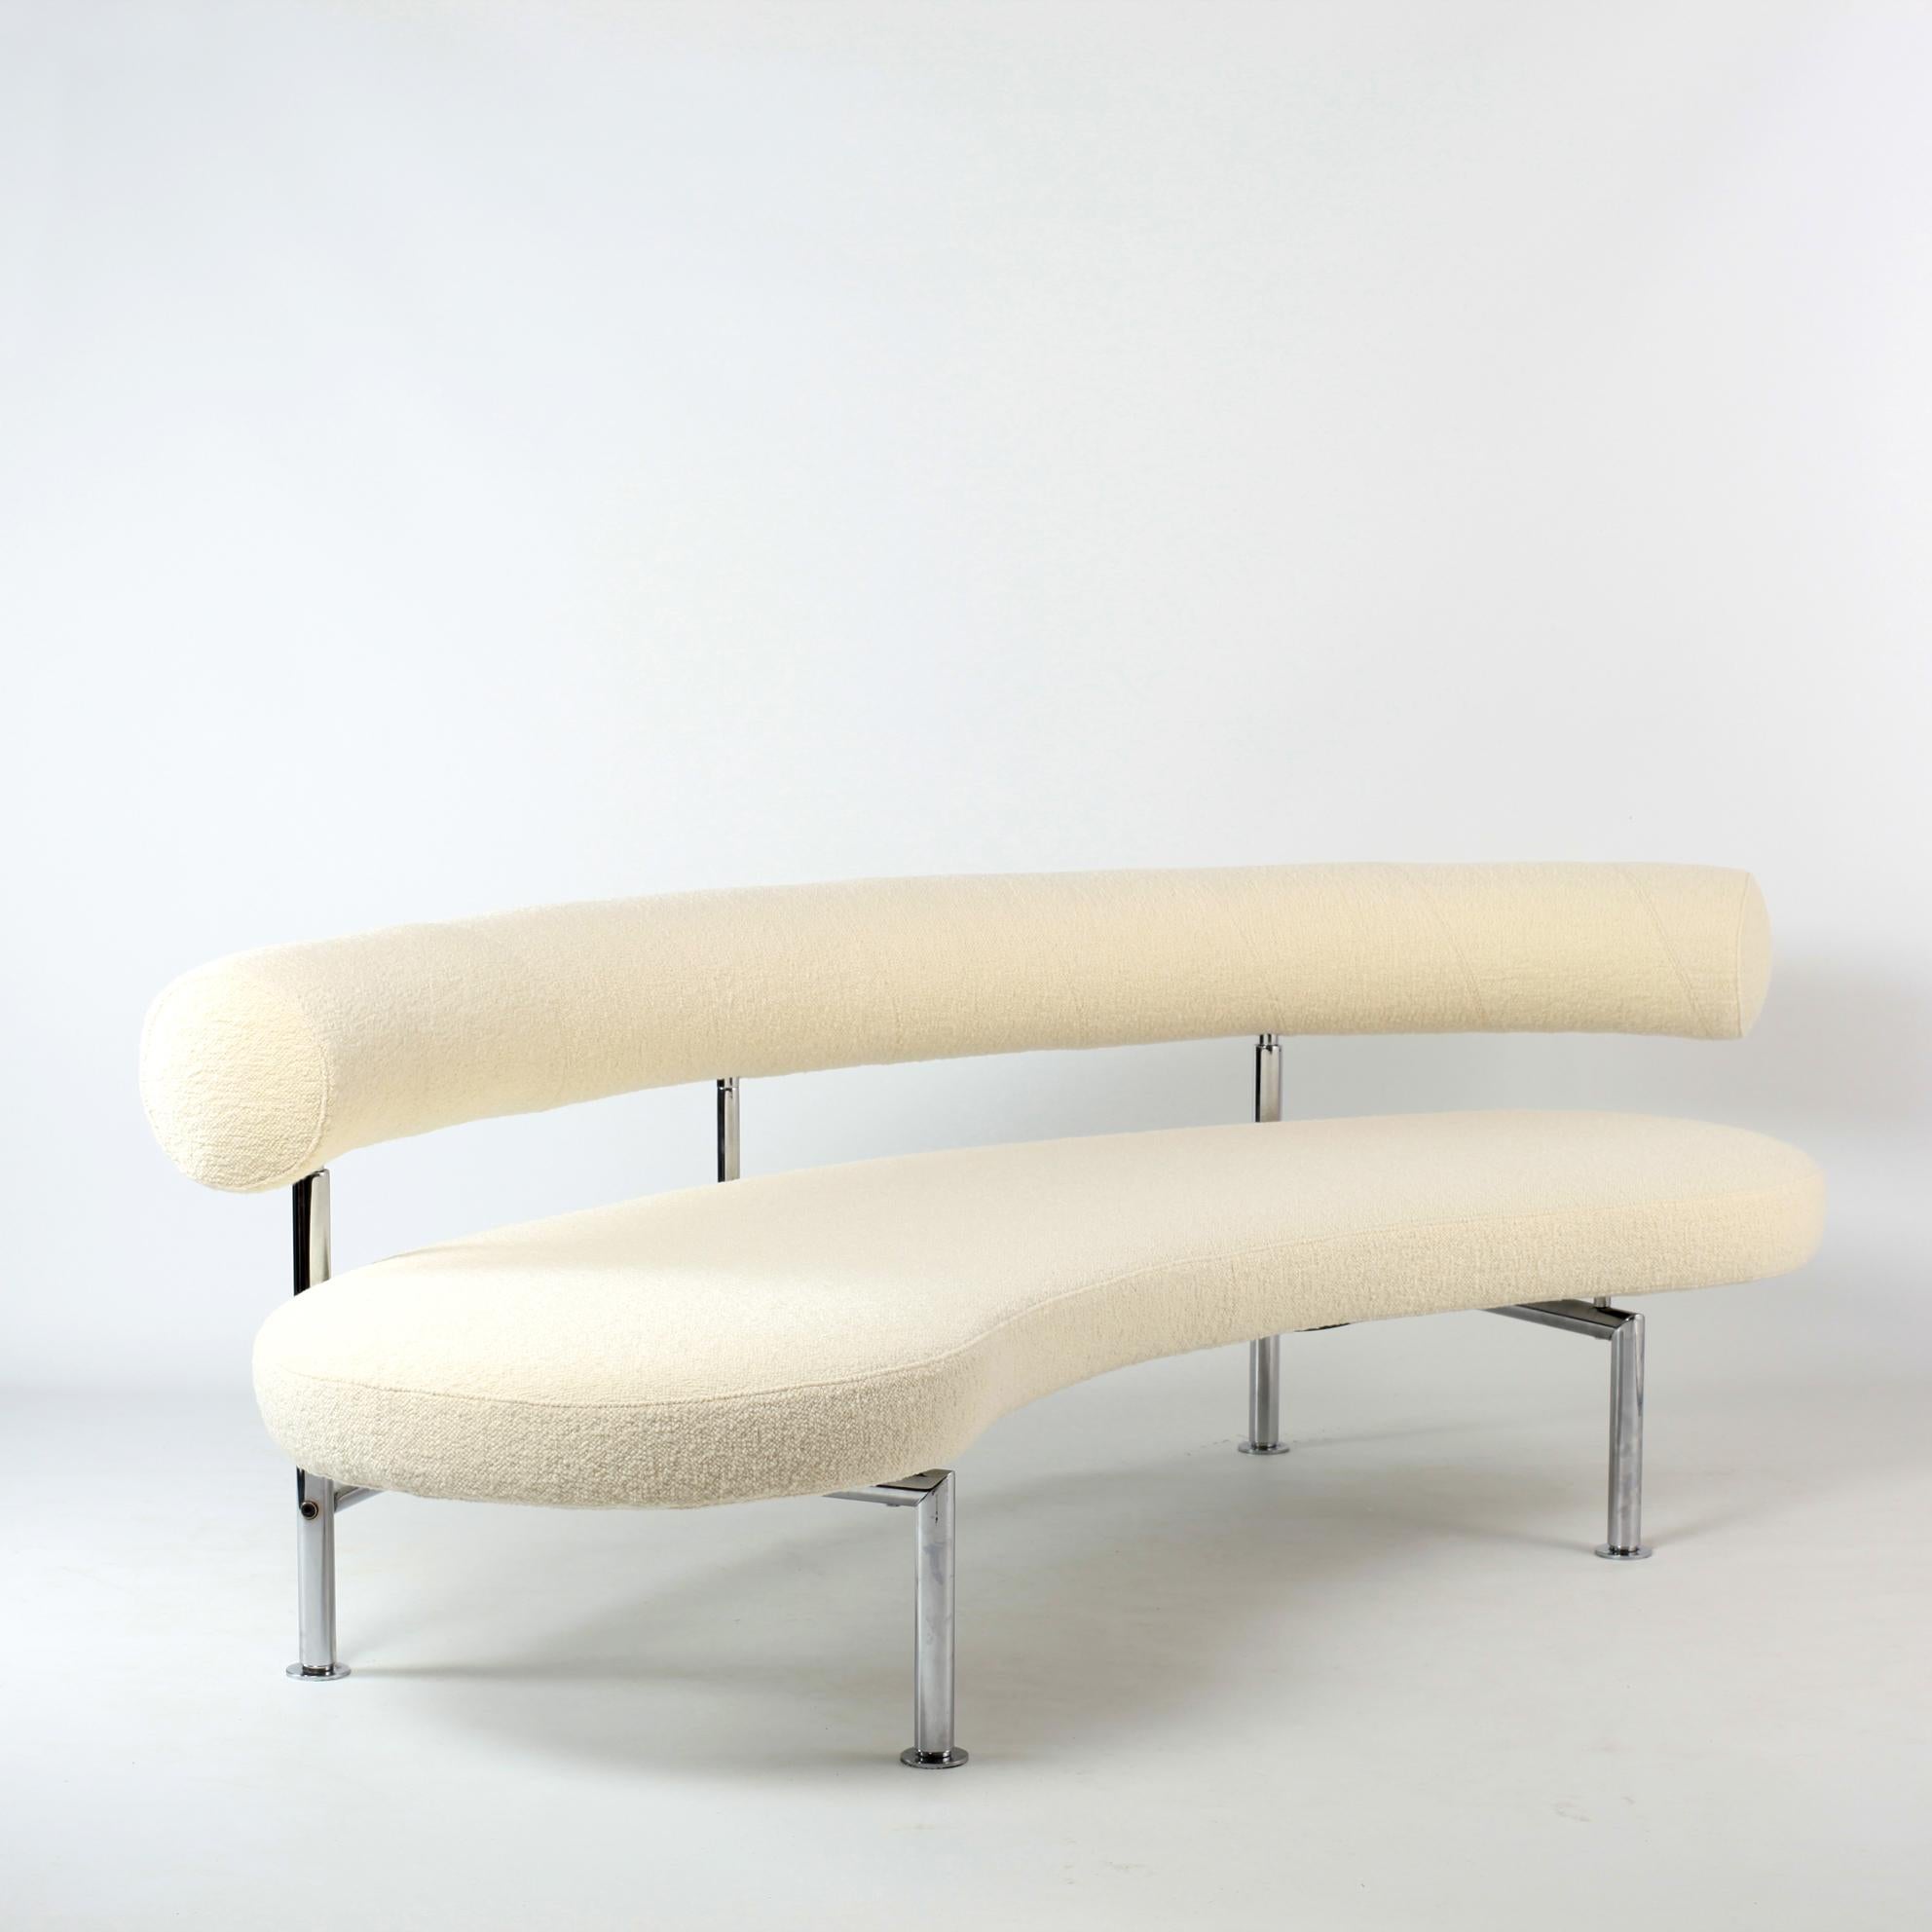 Iconic sofa max by Antonio Citterio for Flexform creation 1983 Italy.
Nice curved shape on chrome structure.
Reupholstered in Ivory Bouclé Dedar fabric.